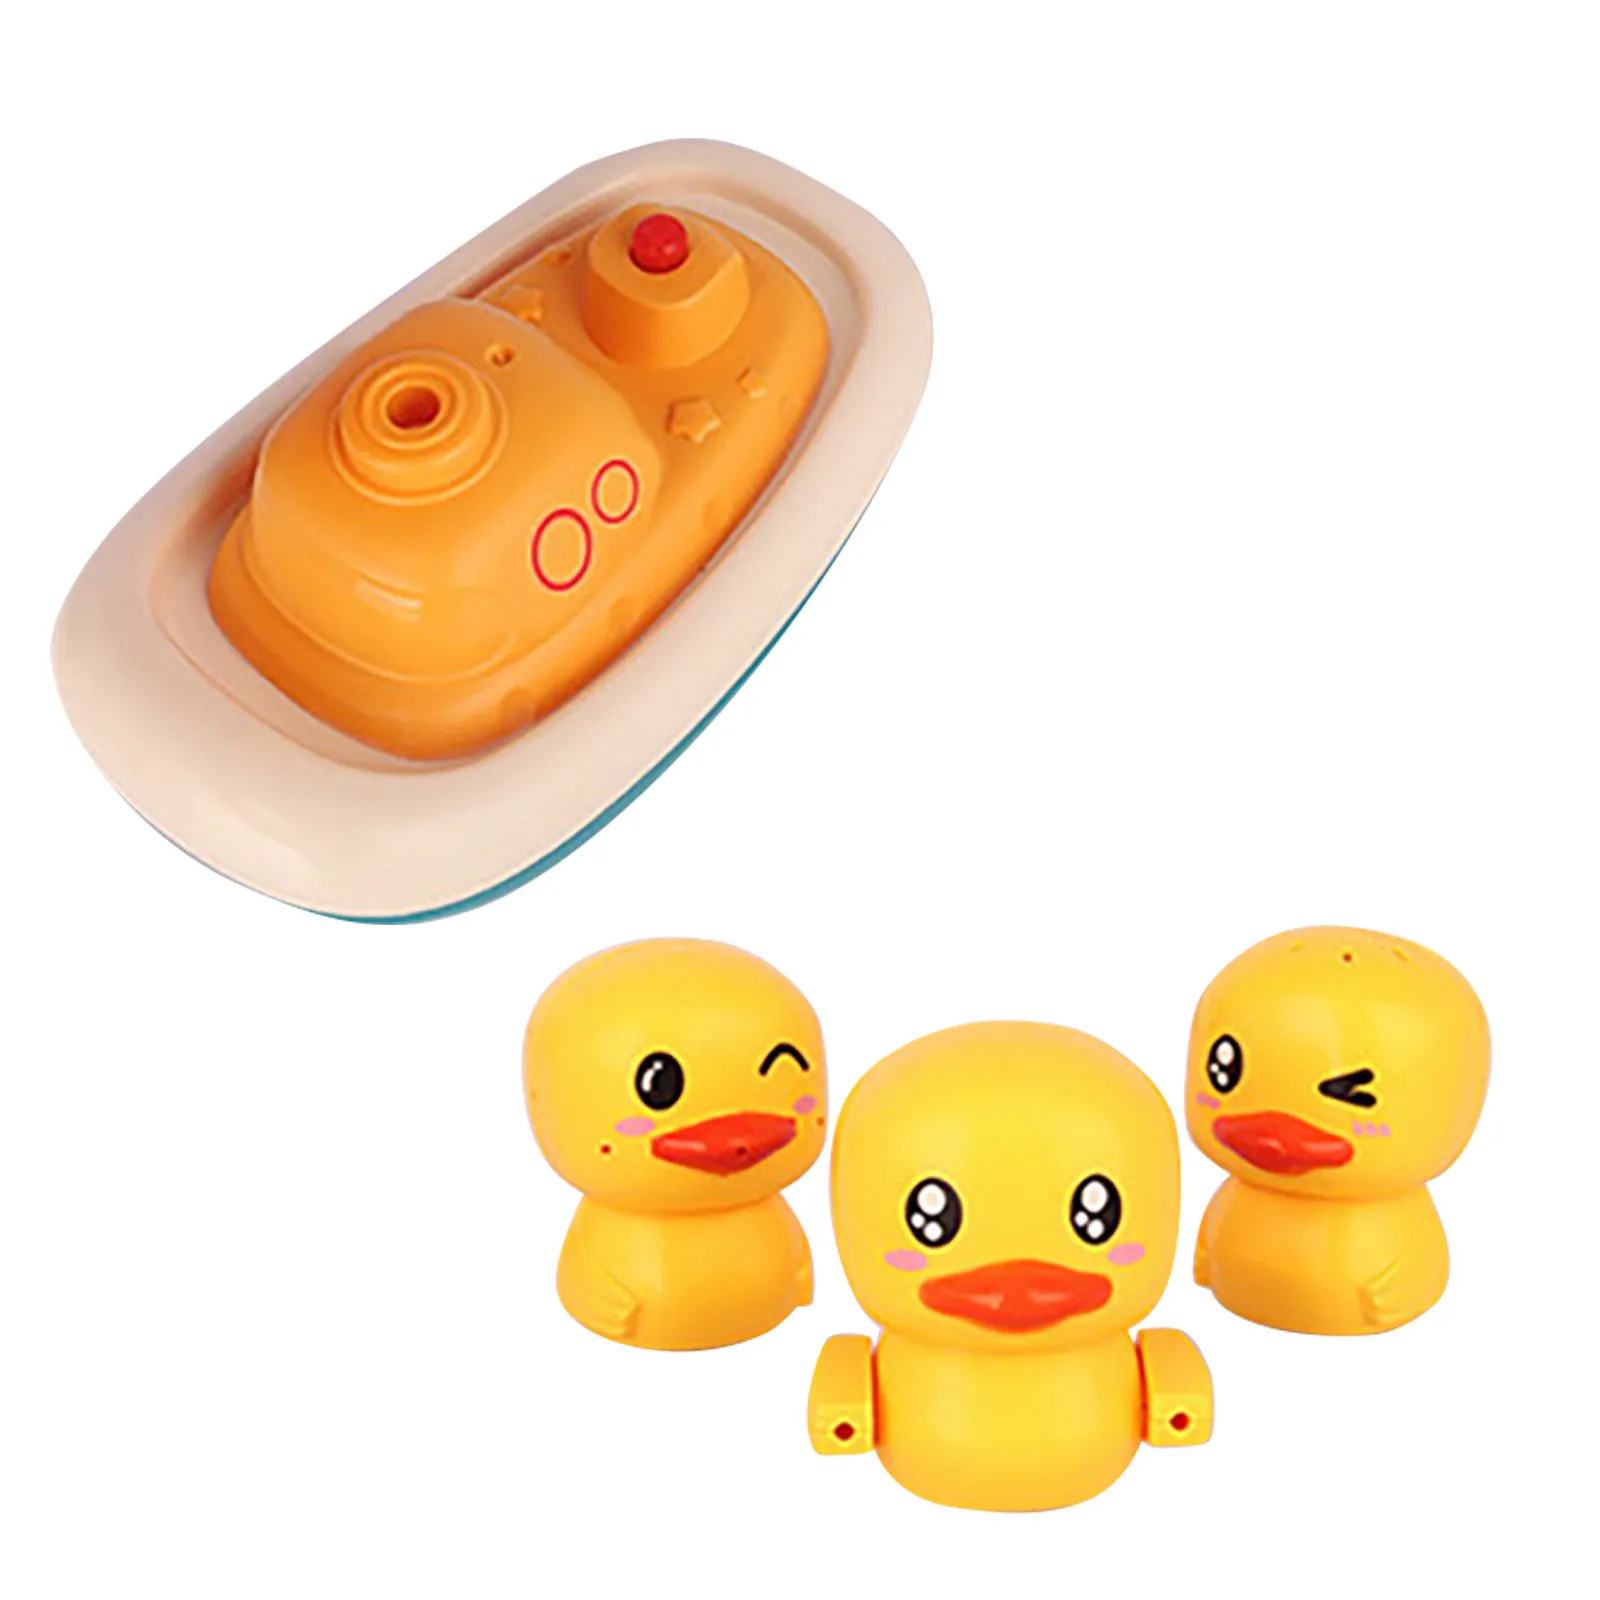 

Spray Bathtub Floating Toys 3 Ducks Baby For Toddlers Toys Bath Sprinkler Modes Bath toy Baby Crawler Steppers Baby 12 Months